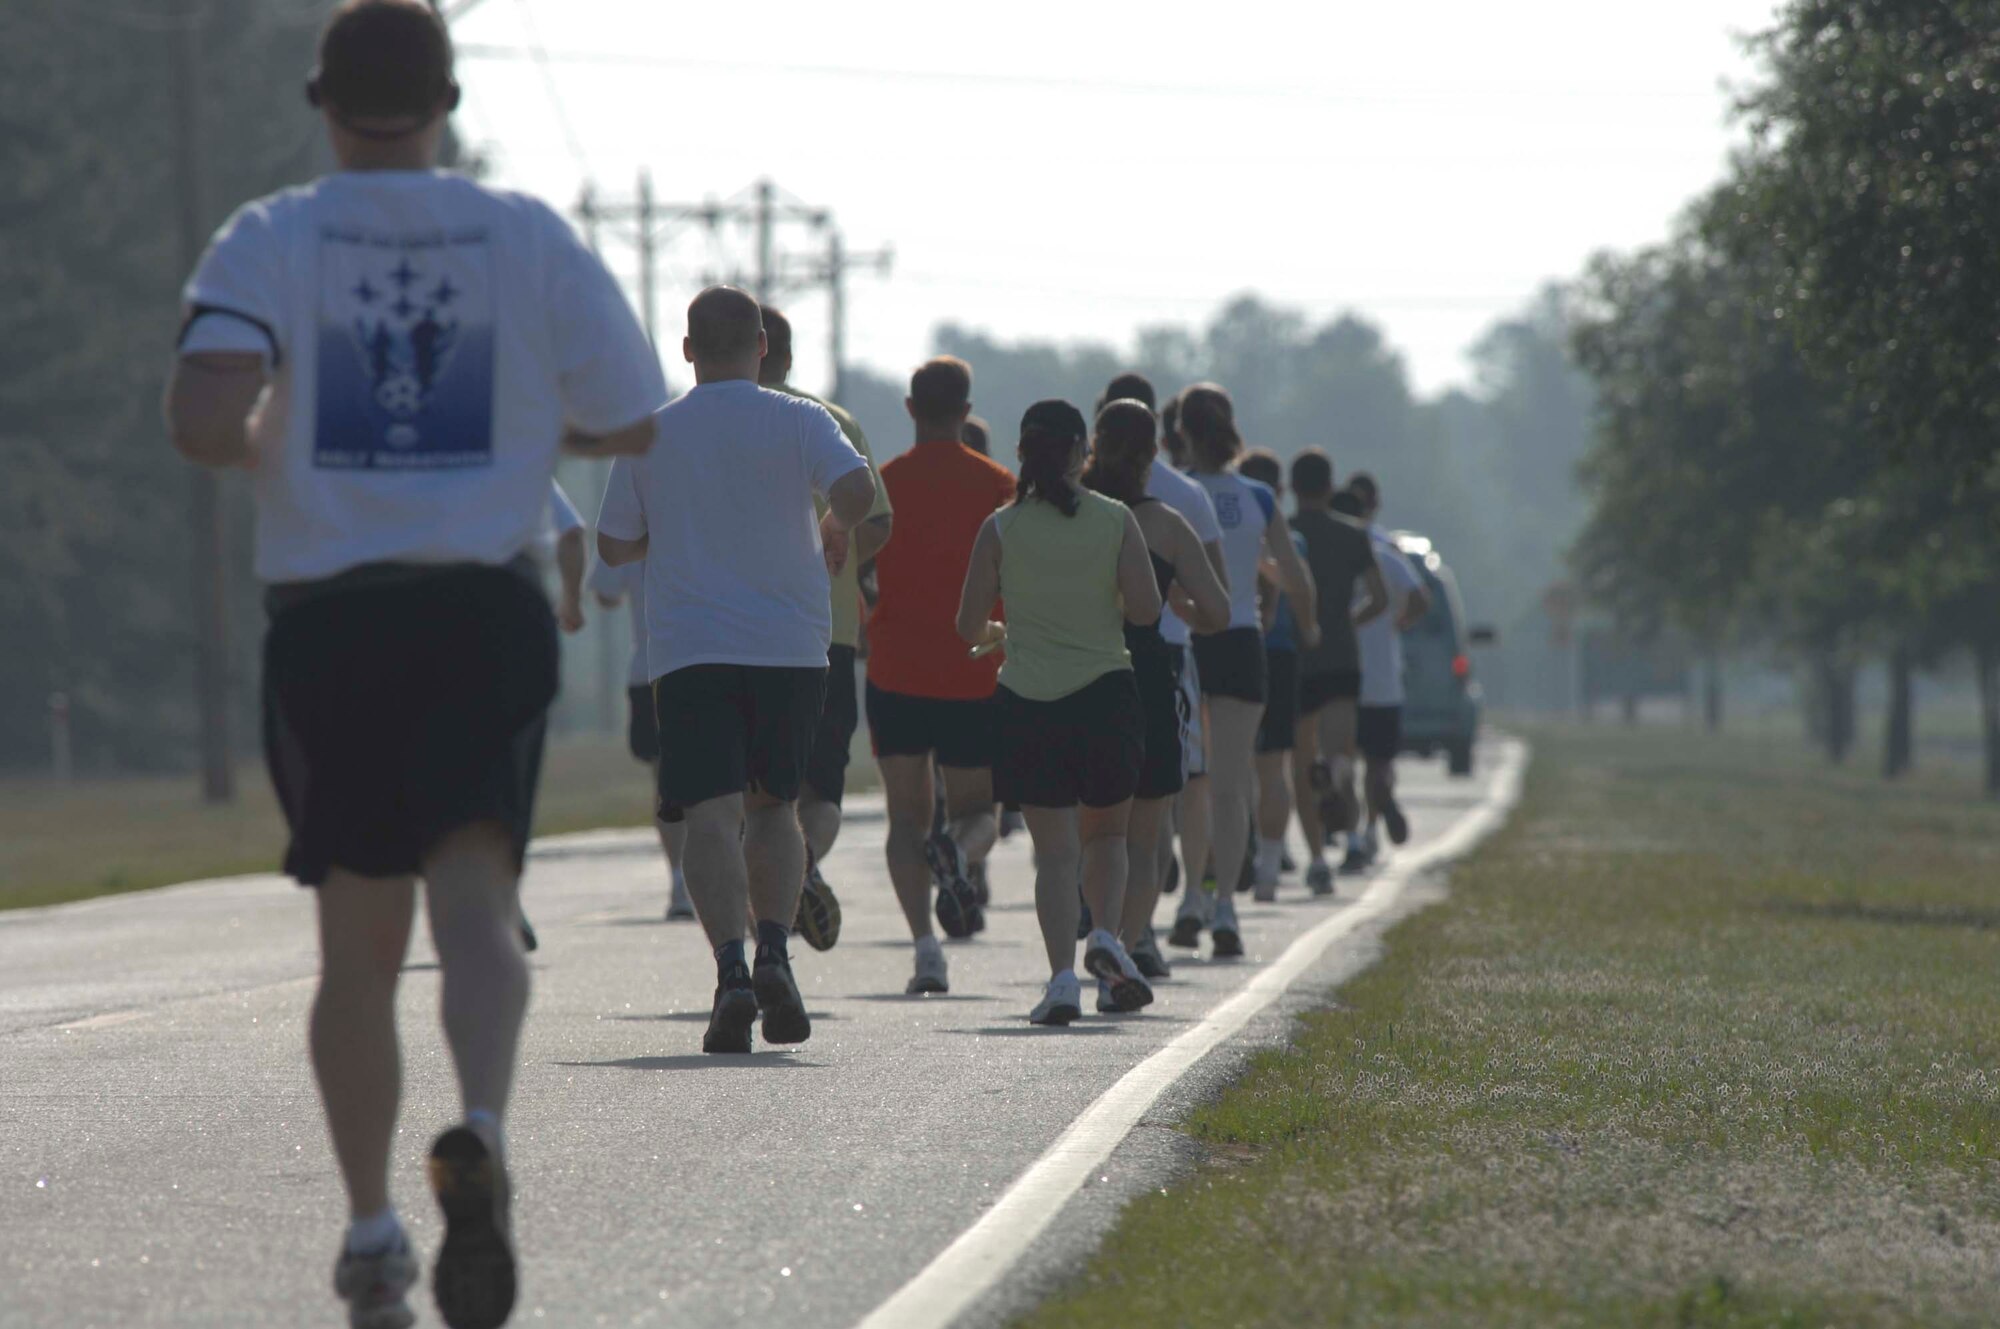 SHAW AIR FORCE BASE, S.C.-- The 20th Fighter Wing held a 3rd annual half marathon sponsored by the 20th Force Support Squadron here May 3. The half marathon consisted of nine four-person teams, with each individual running more than three miles, and 20 individuals running the entire 13.1 miles. (U.S. Air Force photo/Staff Sgt. Nathan Bevier)